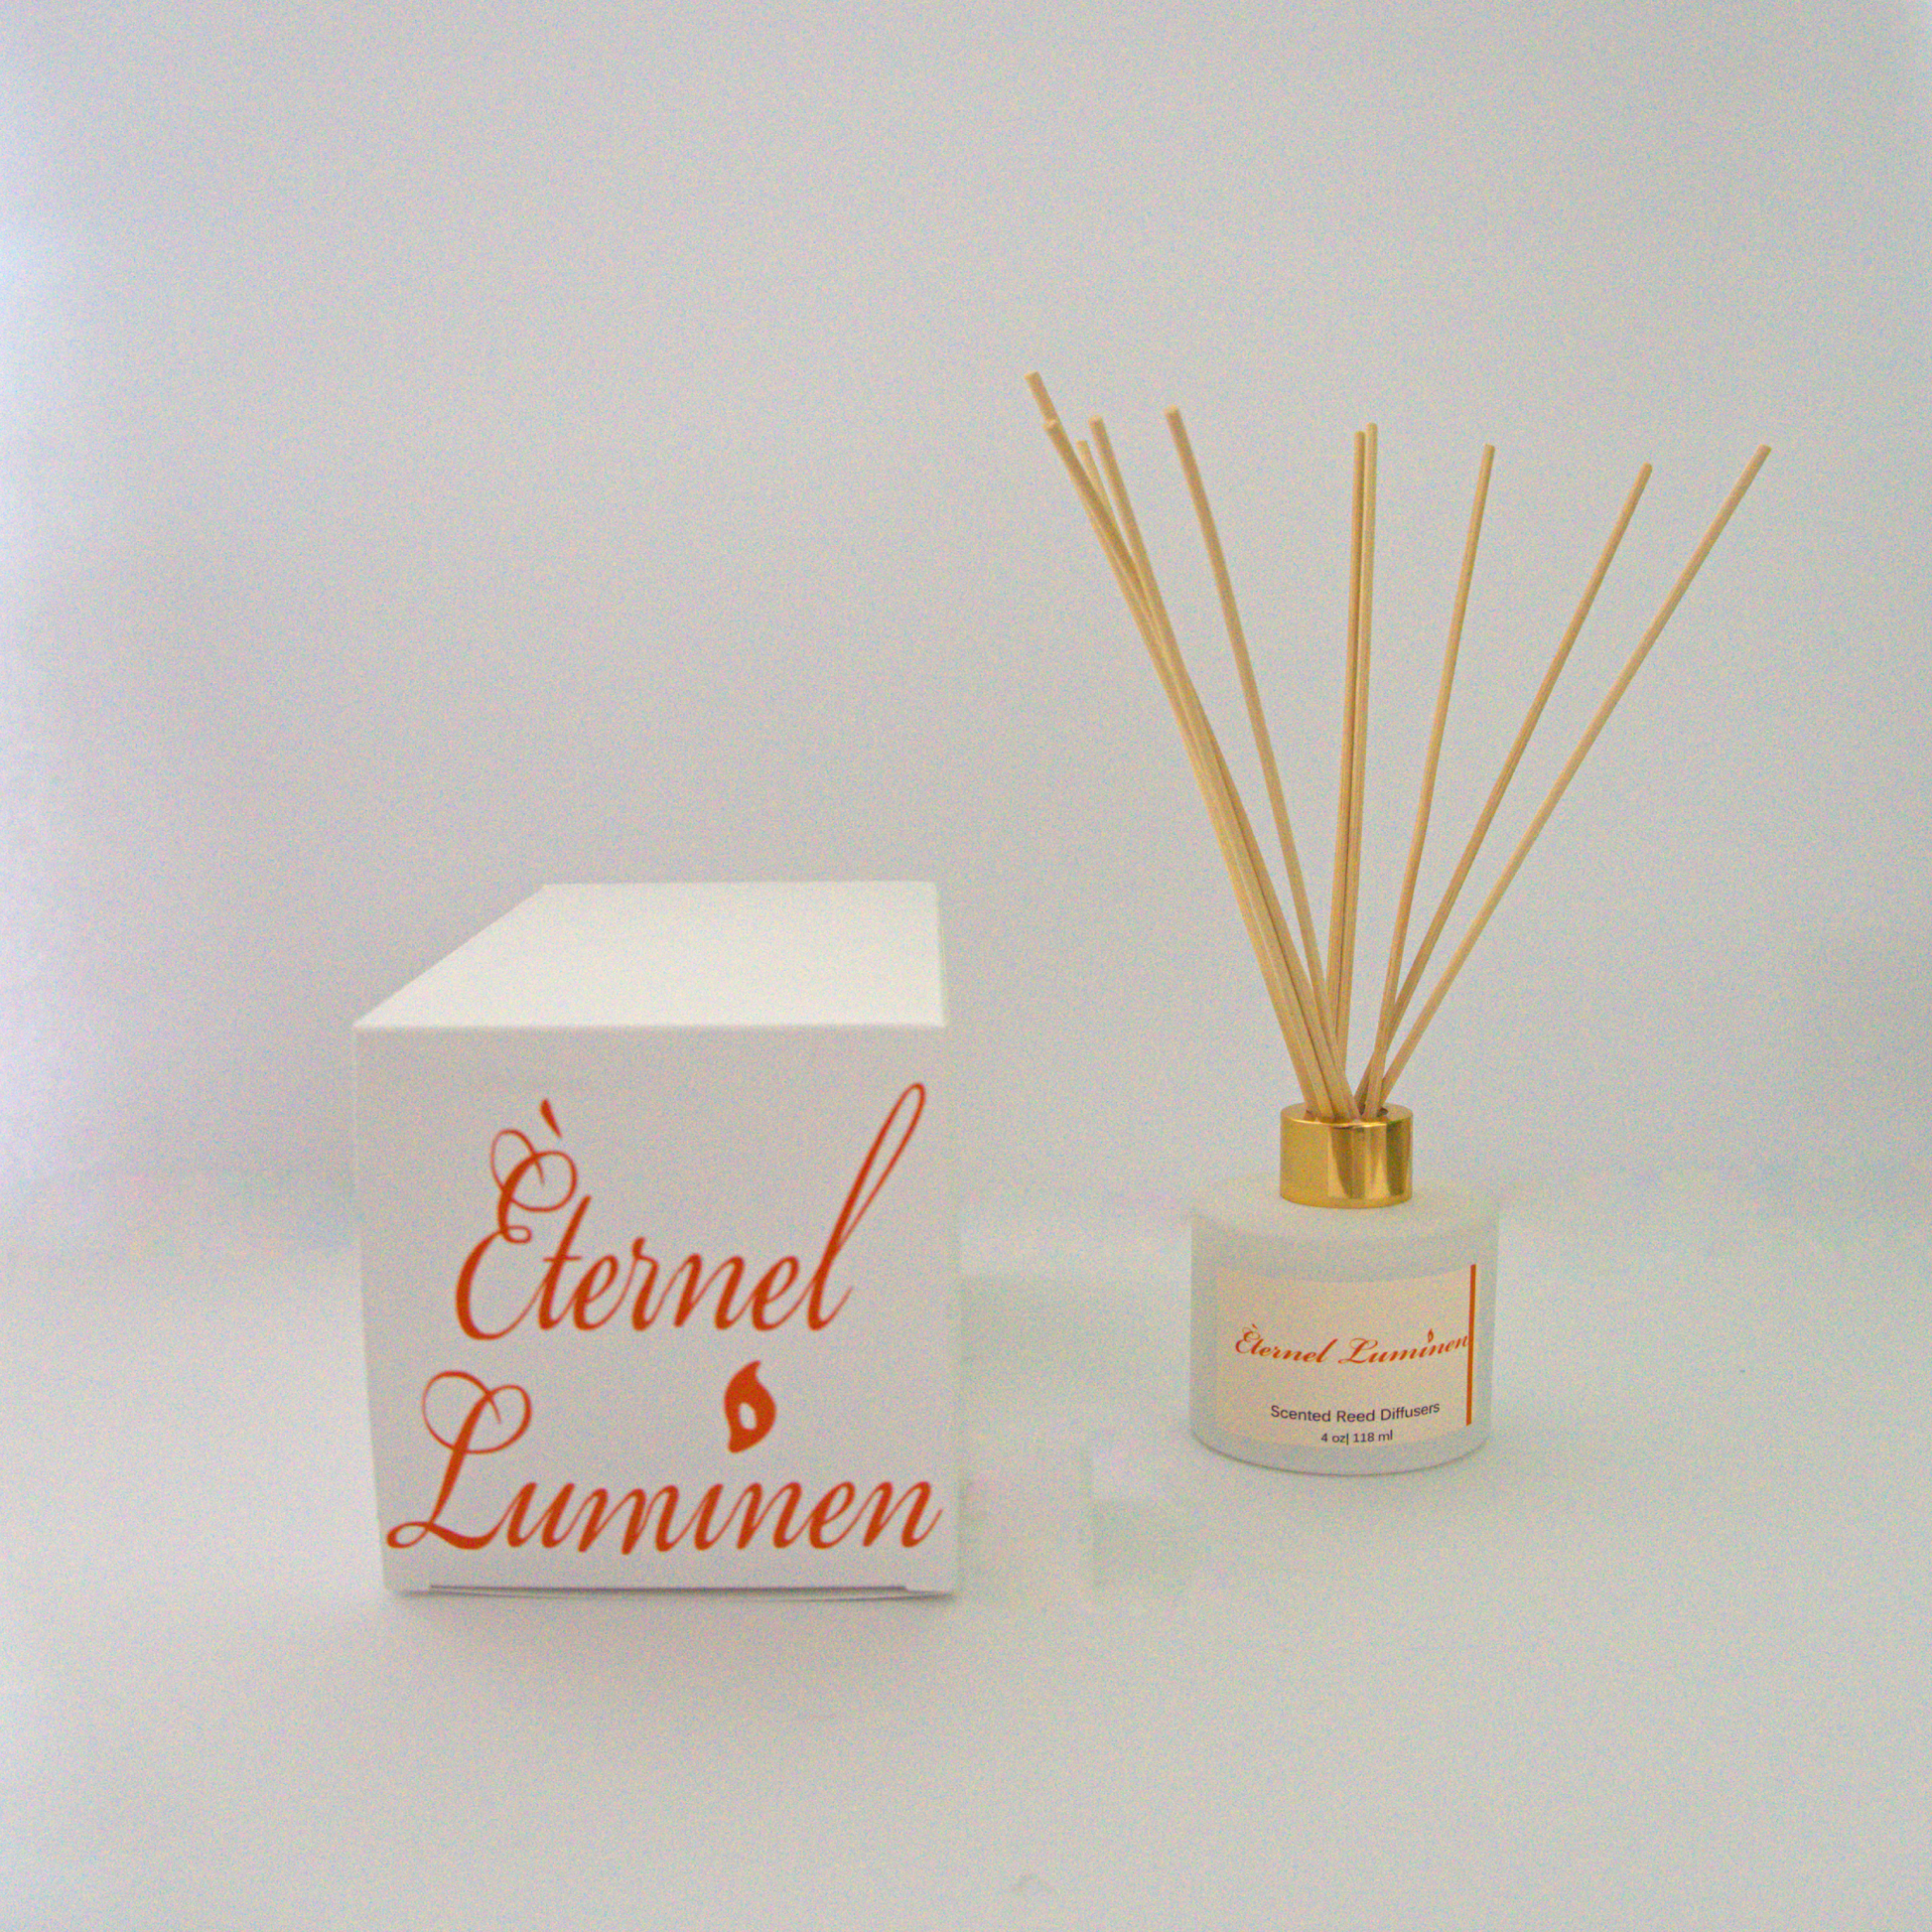 A 2.75 oz white jar with a gold band reed diffuser sitting against a white background and a box with the Eternel Luminen logo across the top.